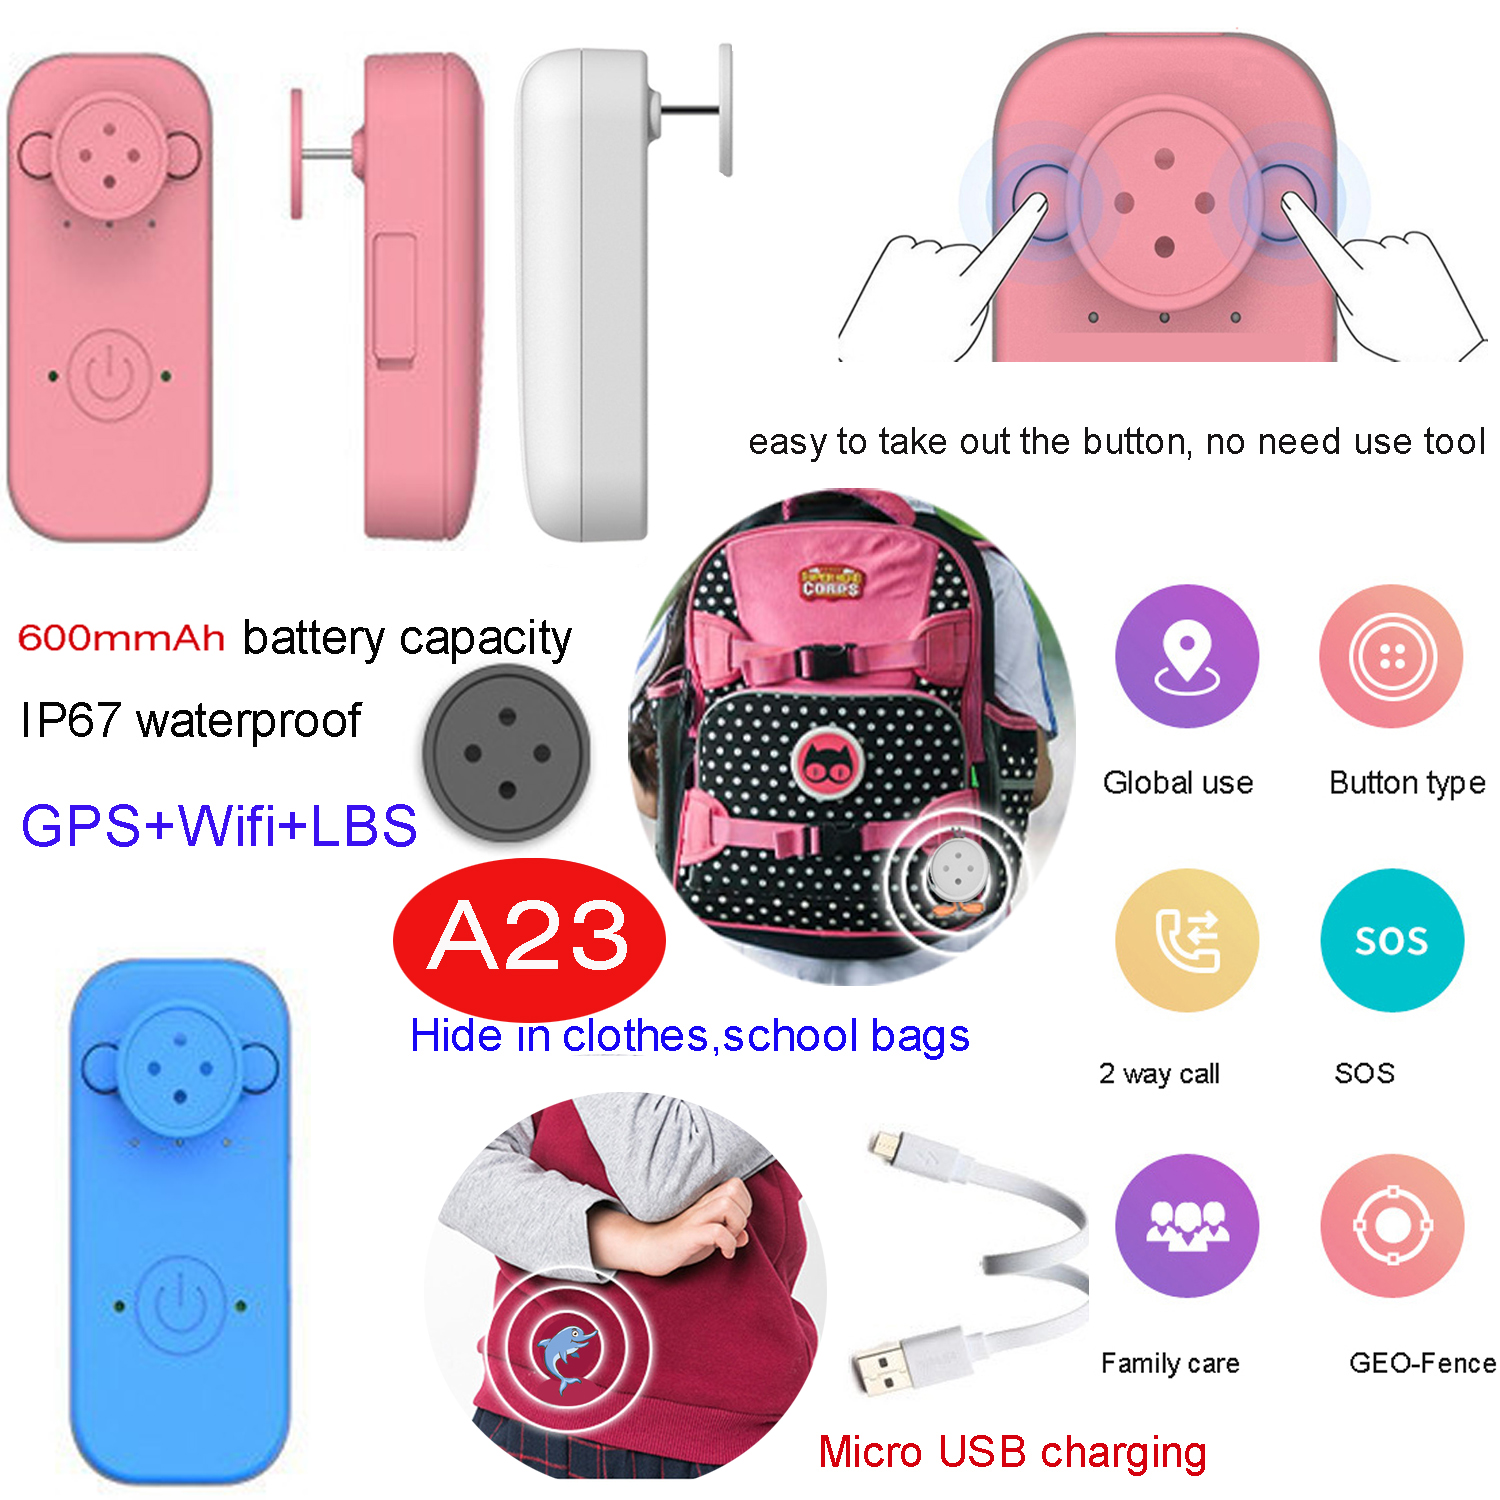 New 2G Hidden Mini GPS Tracker with SOS button for Child